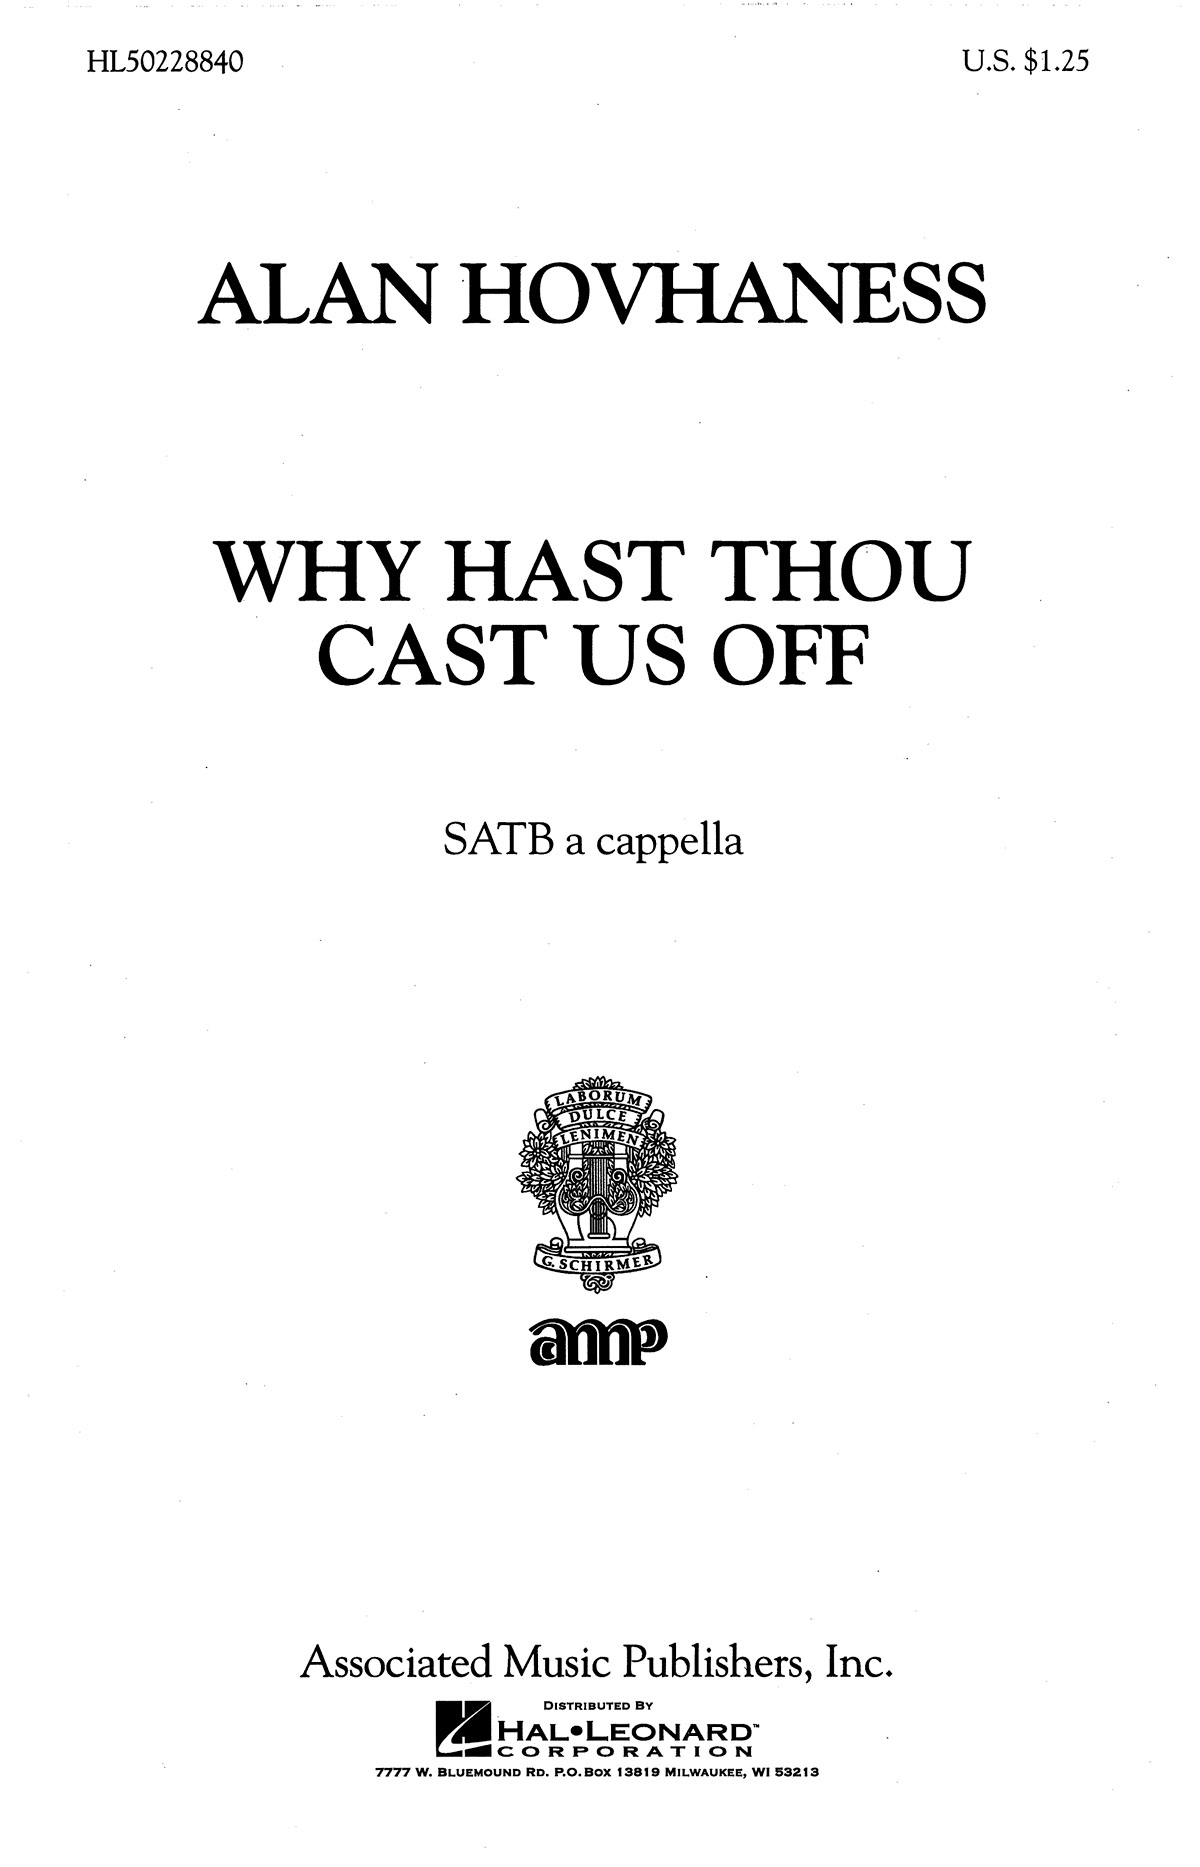 Alan Hovhaness: Why Hast Thou Cast Us Off Motet A Cappella: SATB: Vocal Score